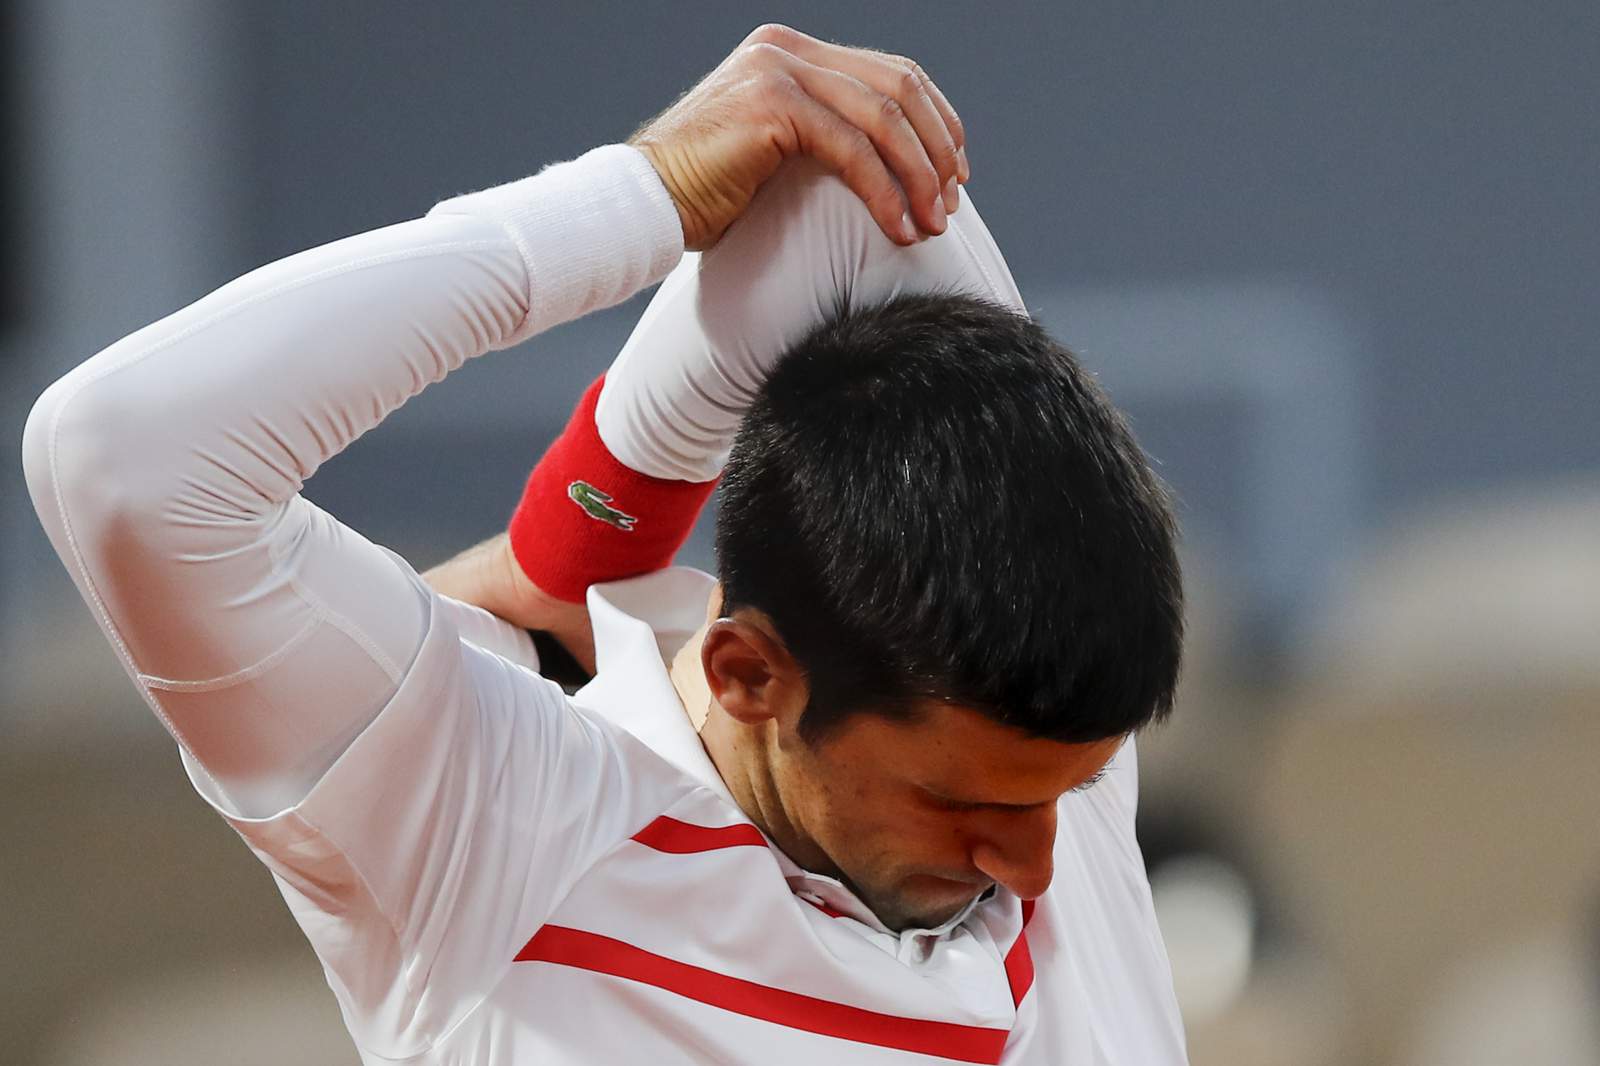 The Latest: Djokovic has arm issue but wins at French Open